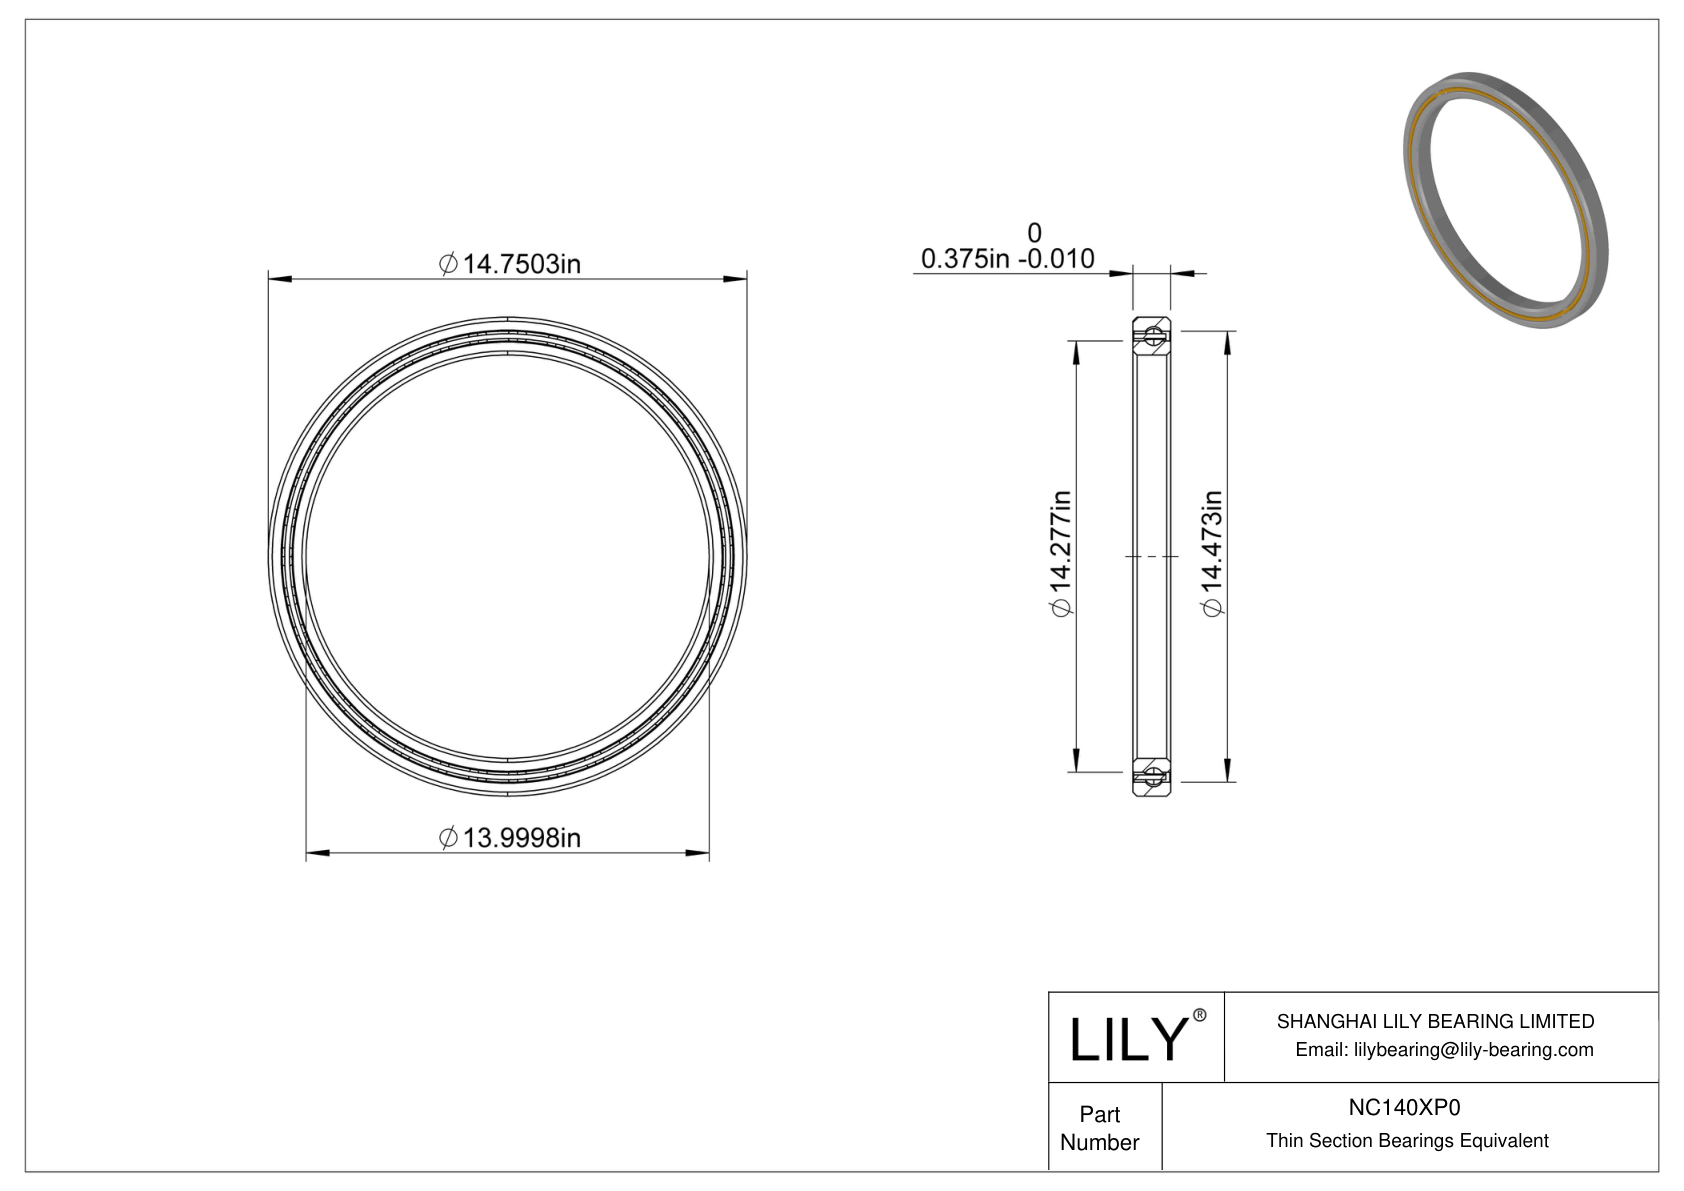 NC140XP0 Constant Section (CS) Bearings cad drawing